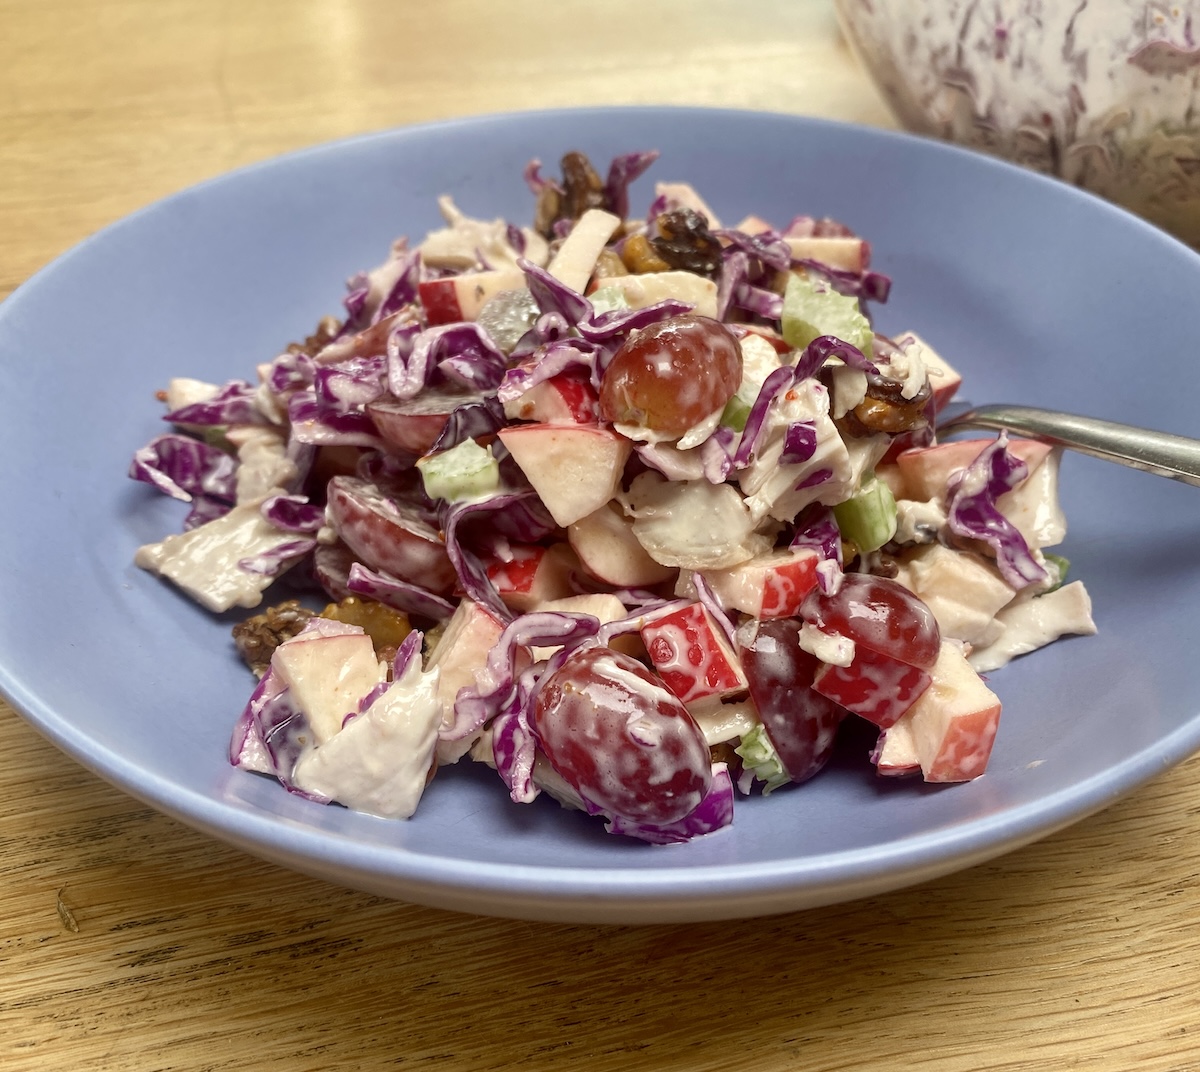 Red cabbage and chicken waldorf salad in a blue bowl.